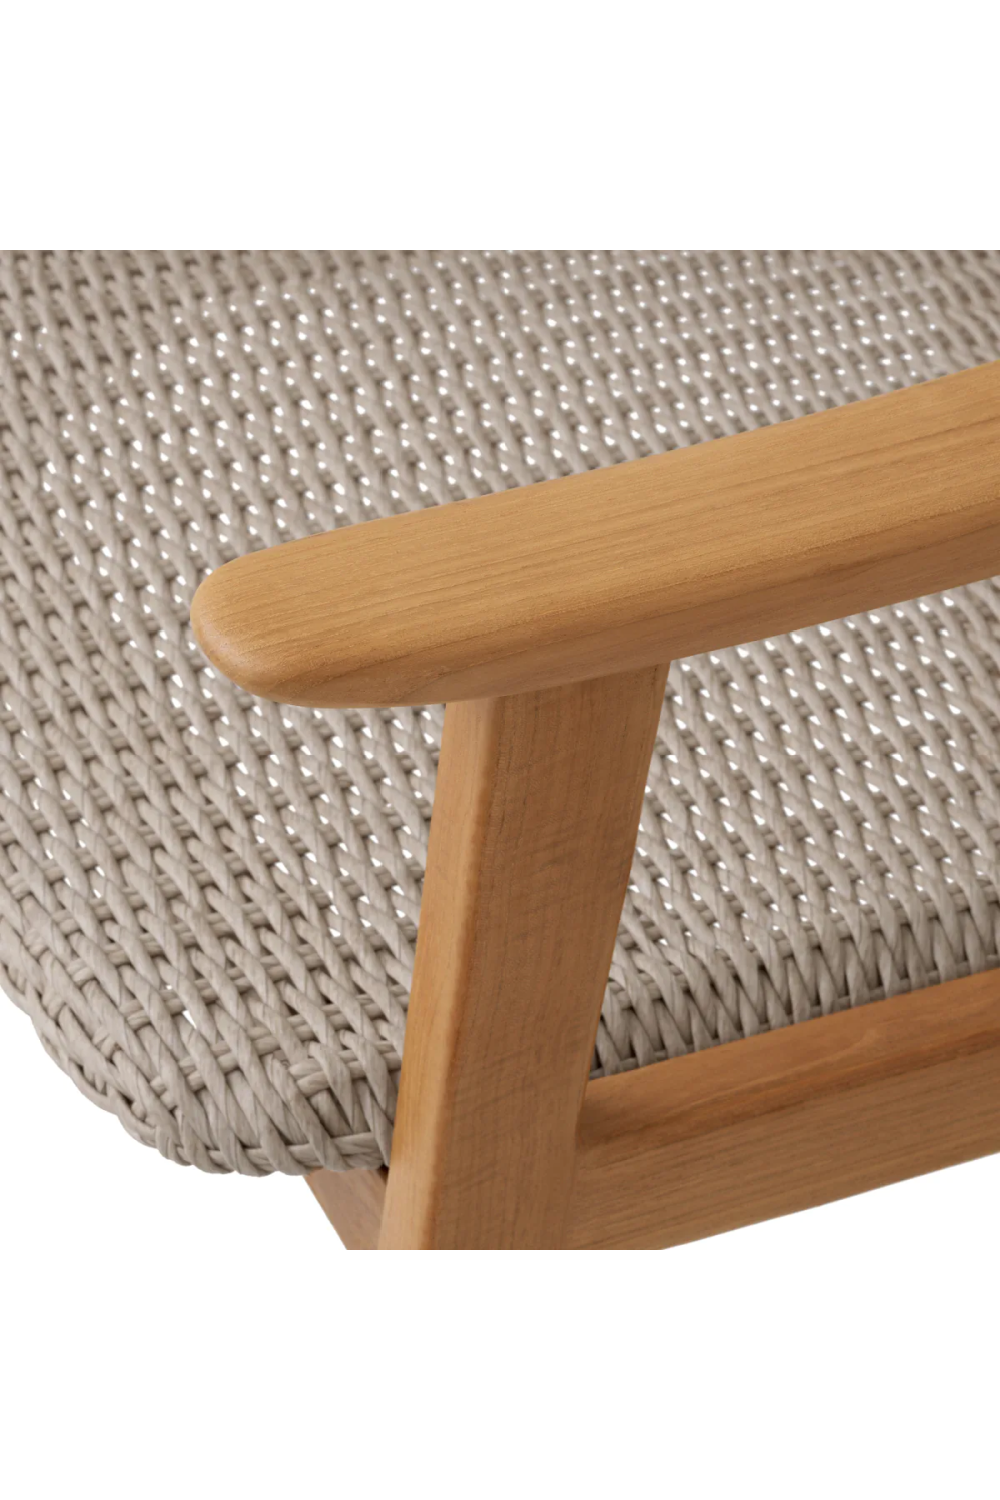 Taupe Weave Outdoor Dining Chair | Eichholtz Honolulu | Oroa.com